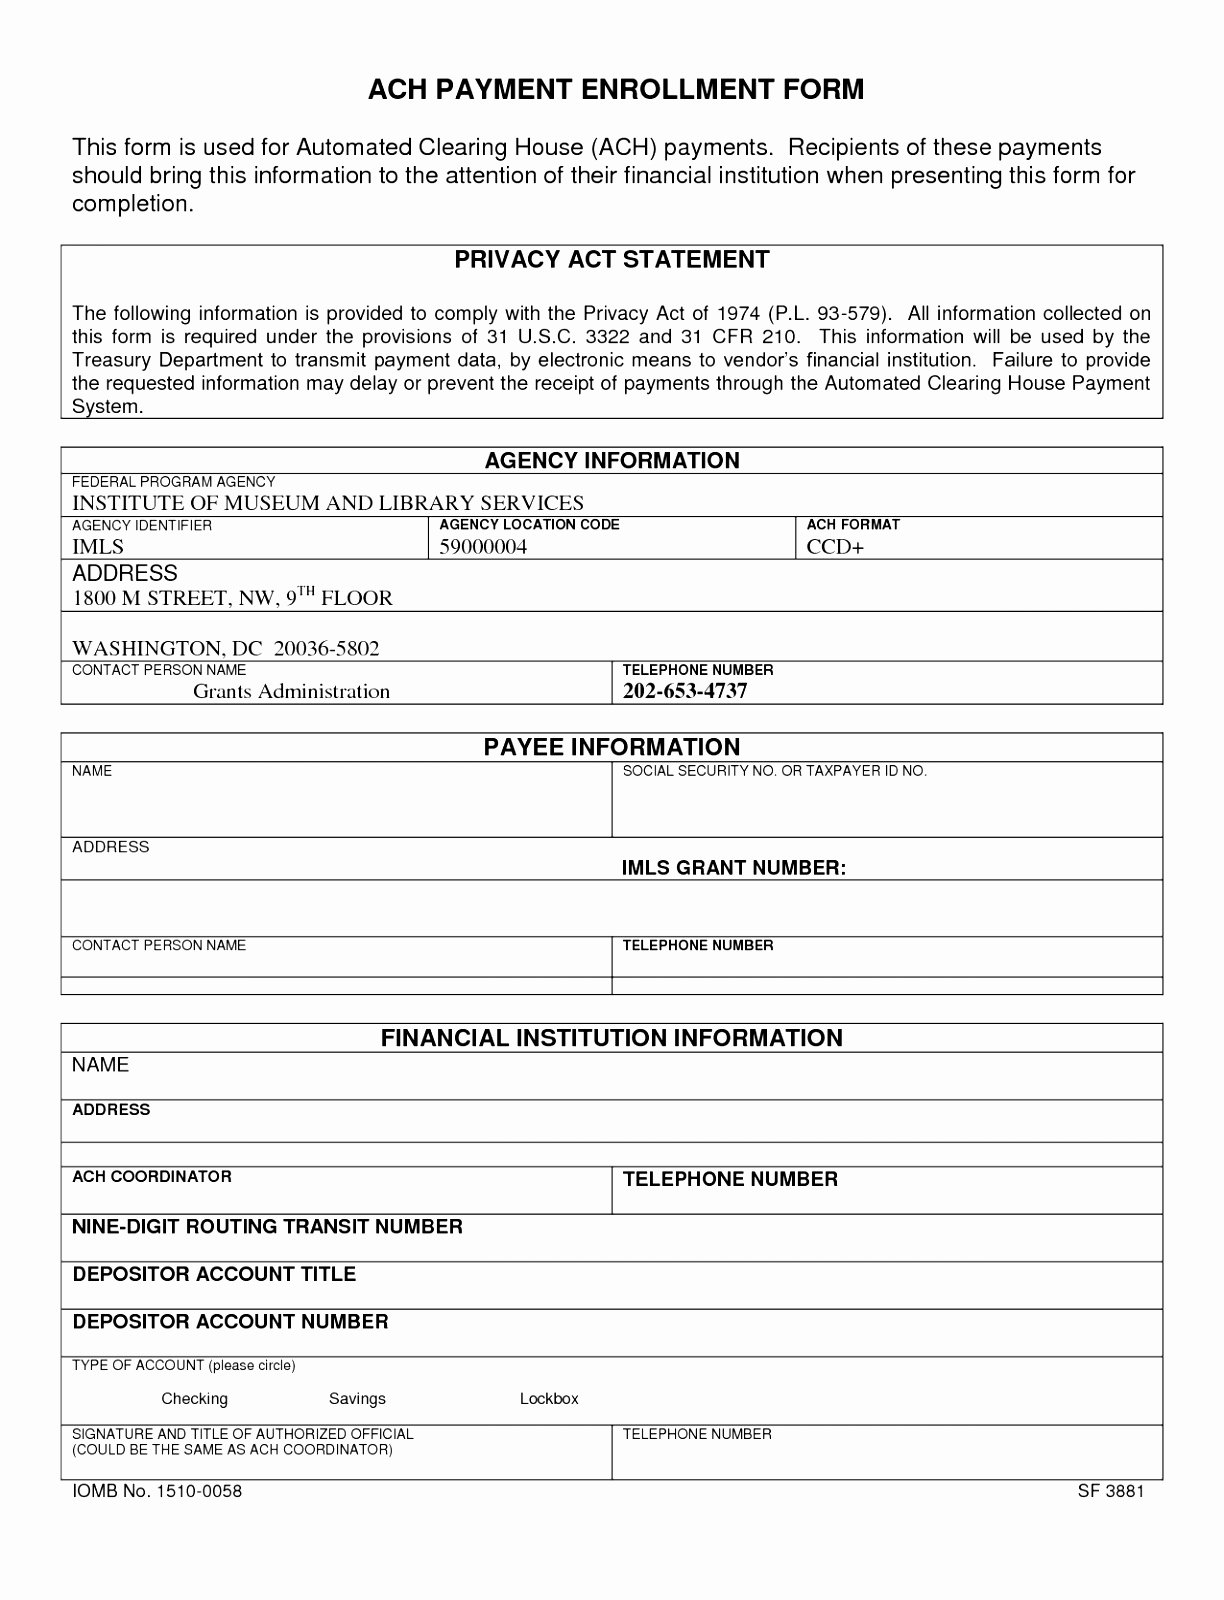 Design Request form Template Best Of 12 Ach forms Templates Eaxah